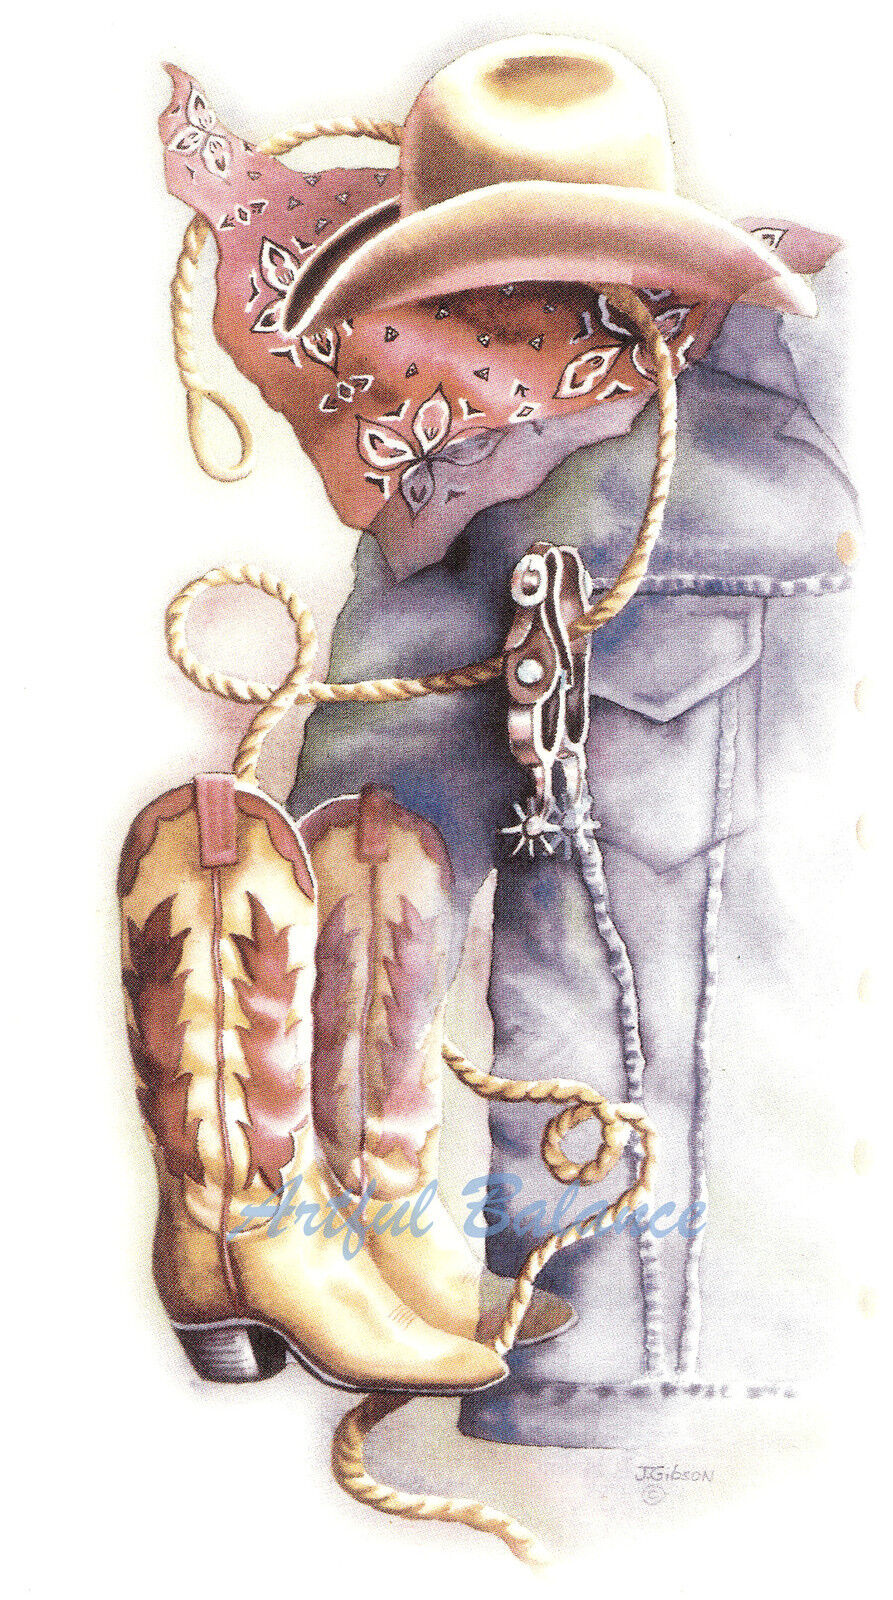 Ceramic Decals Southwest 67% OFF of fixed price Cowboy Rodeo H Wear Classic Western Spurs Boots